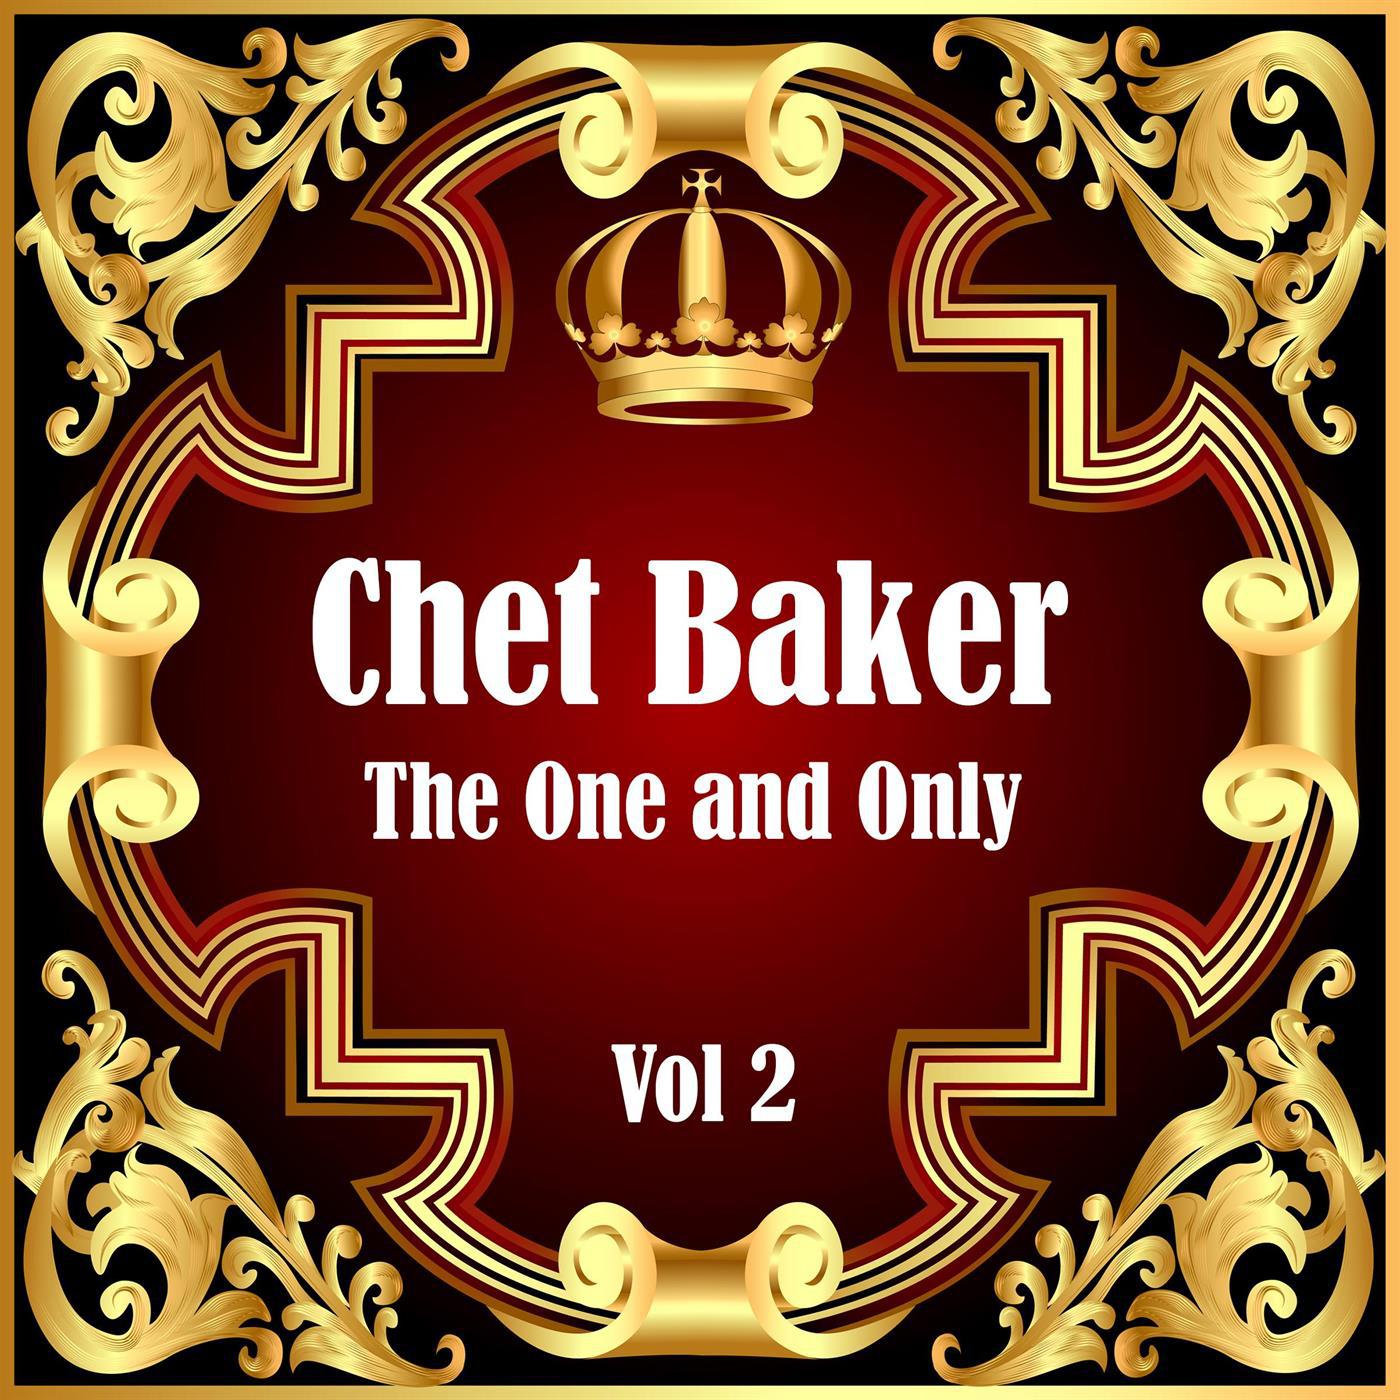 Chet Baker: The One and Only Vol 2专辑